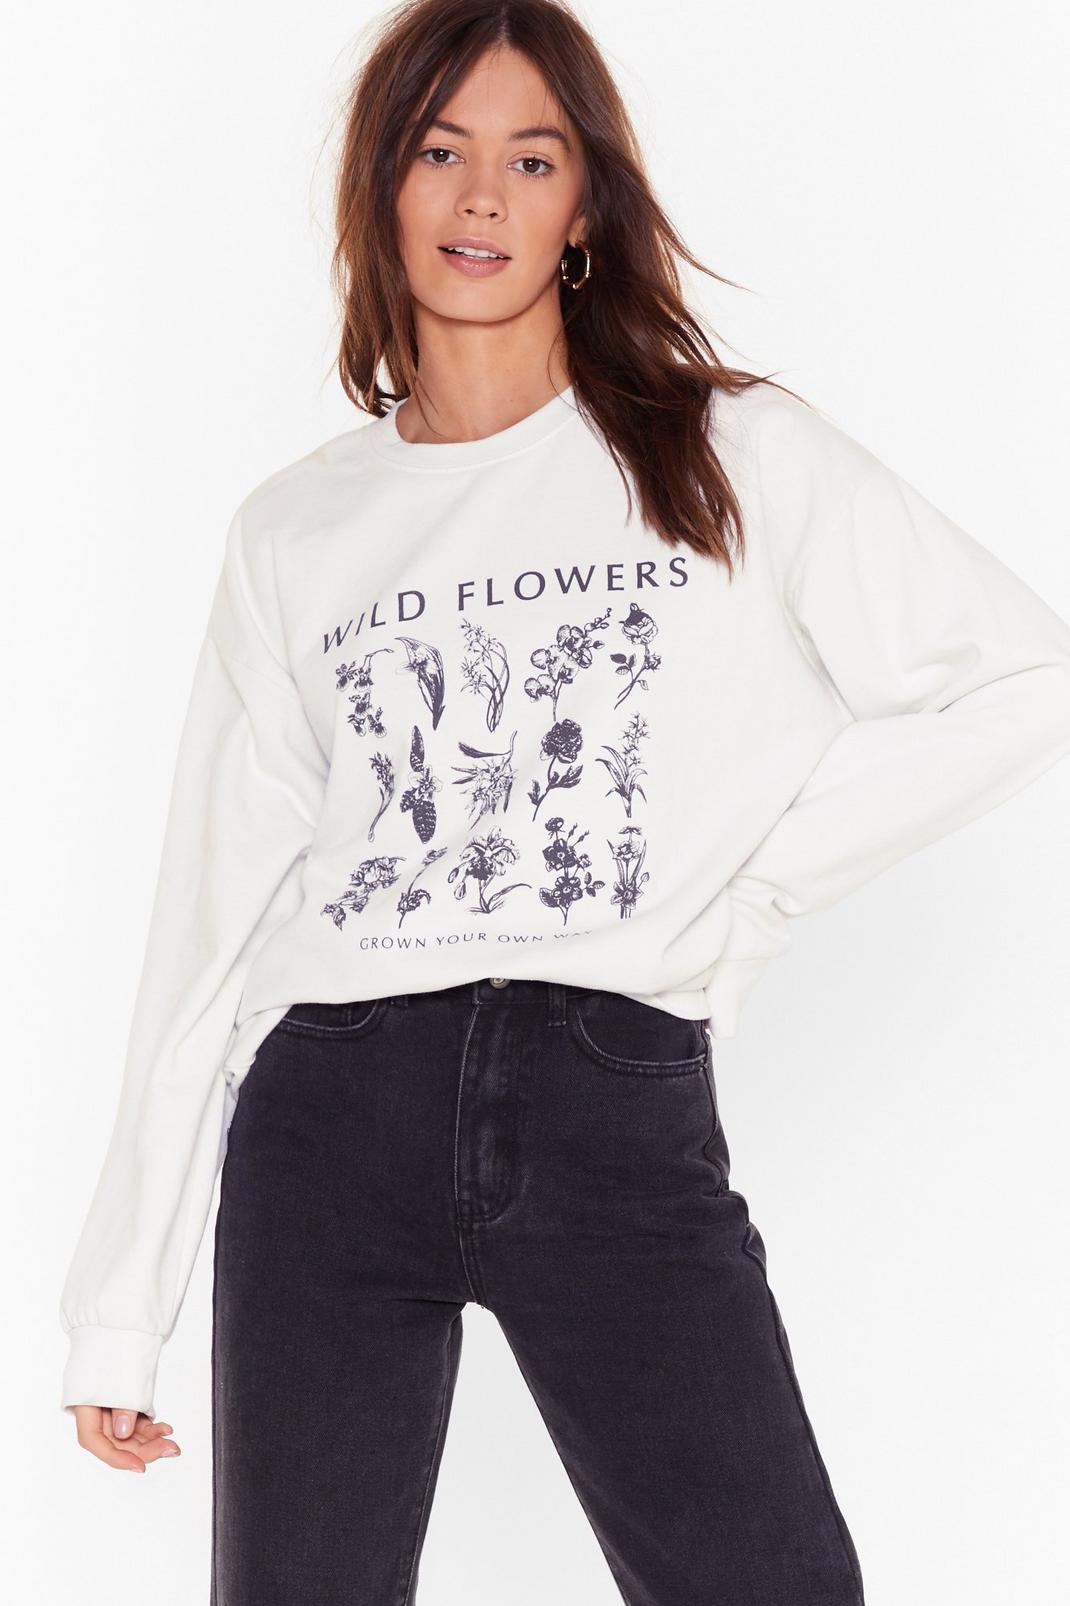 Grown Your Own Way Floral Graphic Sweatshirt image number 1